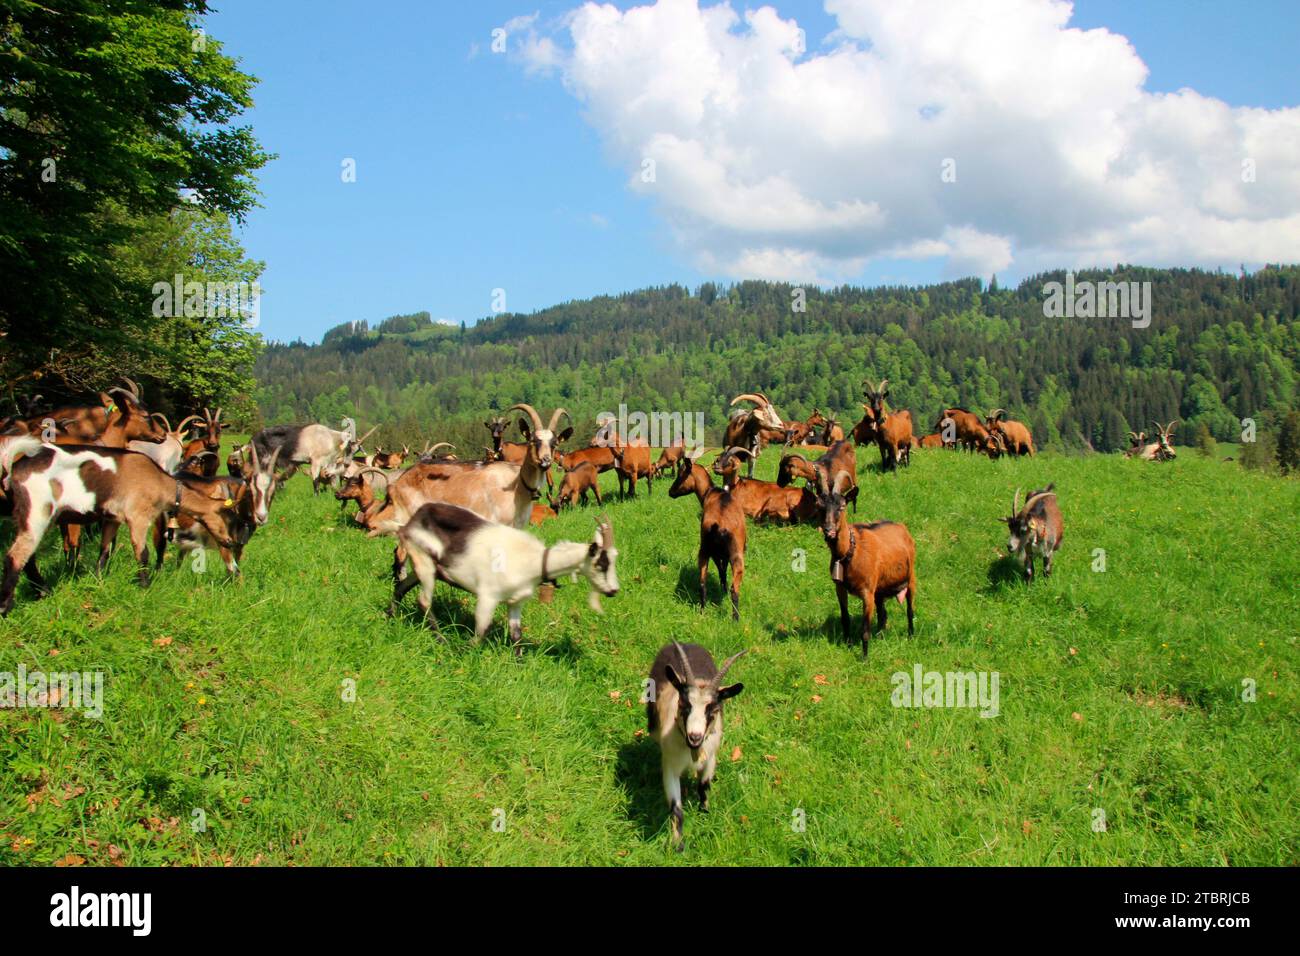 Goats on mountain meadow near Elmau Castle, mixed herd, cultural landscape management, goat herd, grazing, edge of forest, Germany, Bavaria, Upper Bavaria, Mittenwald Stock Photo